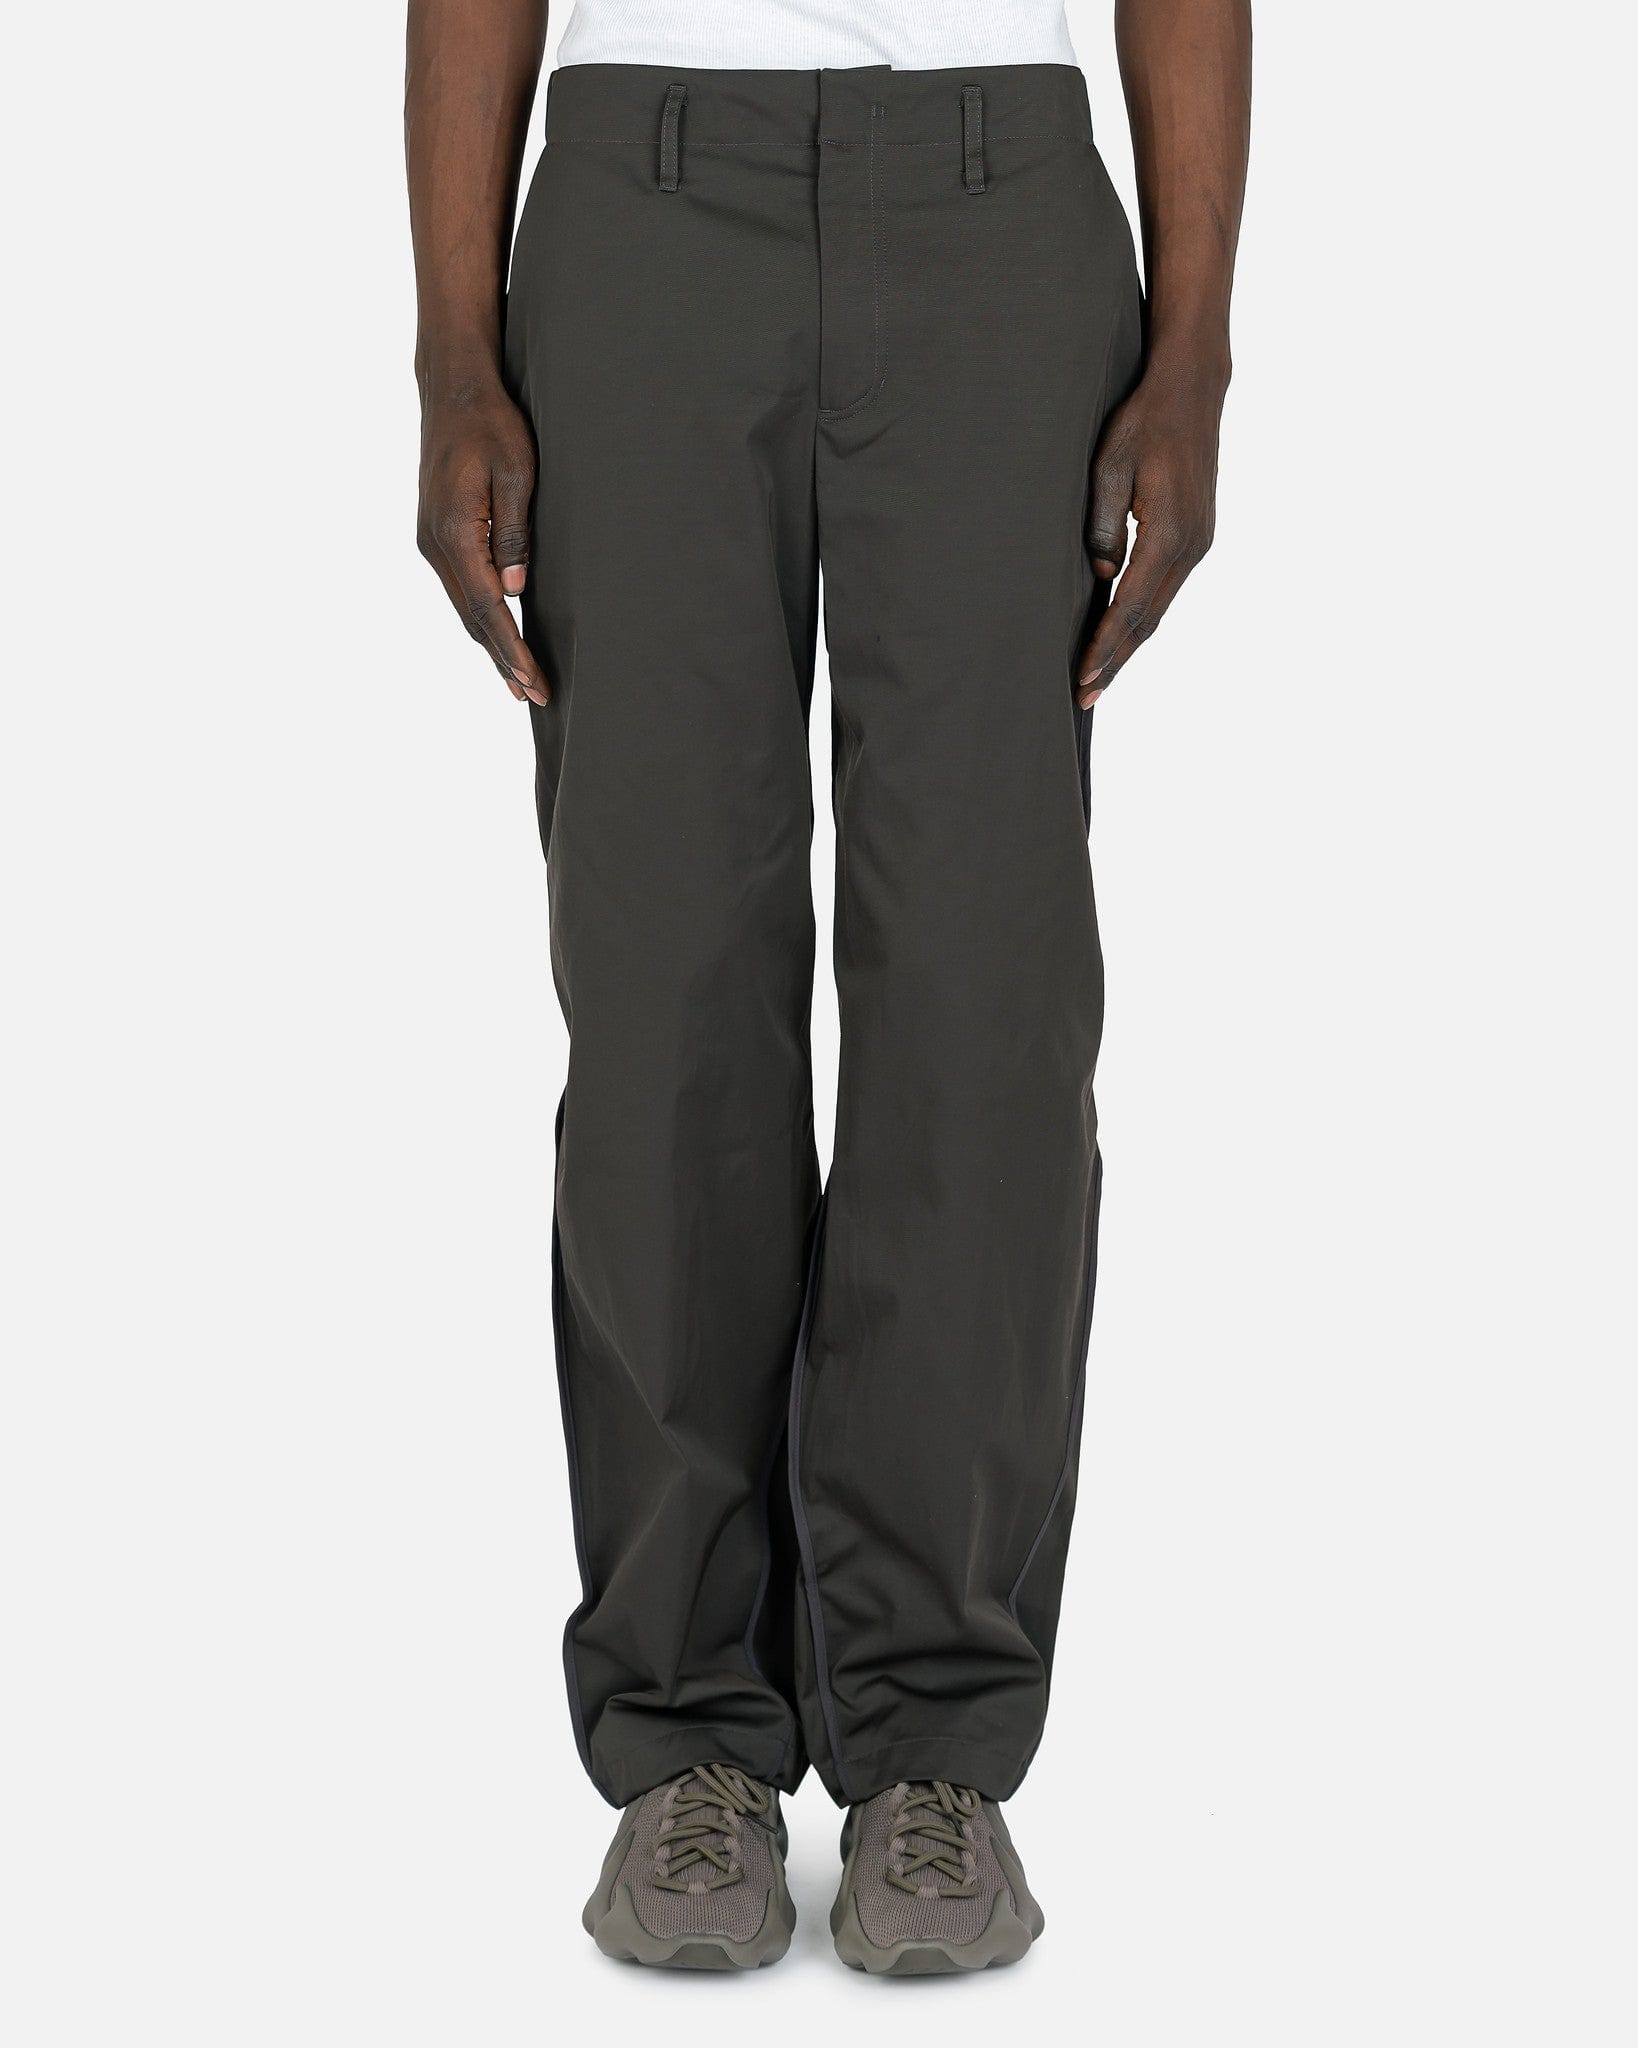 POST ARCHIVE FACTION (P.A.F) Men's Pants 4.0+ Trousers Right in Charcoal